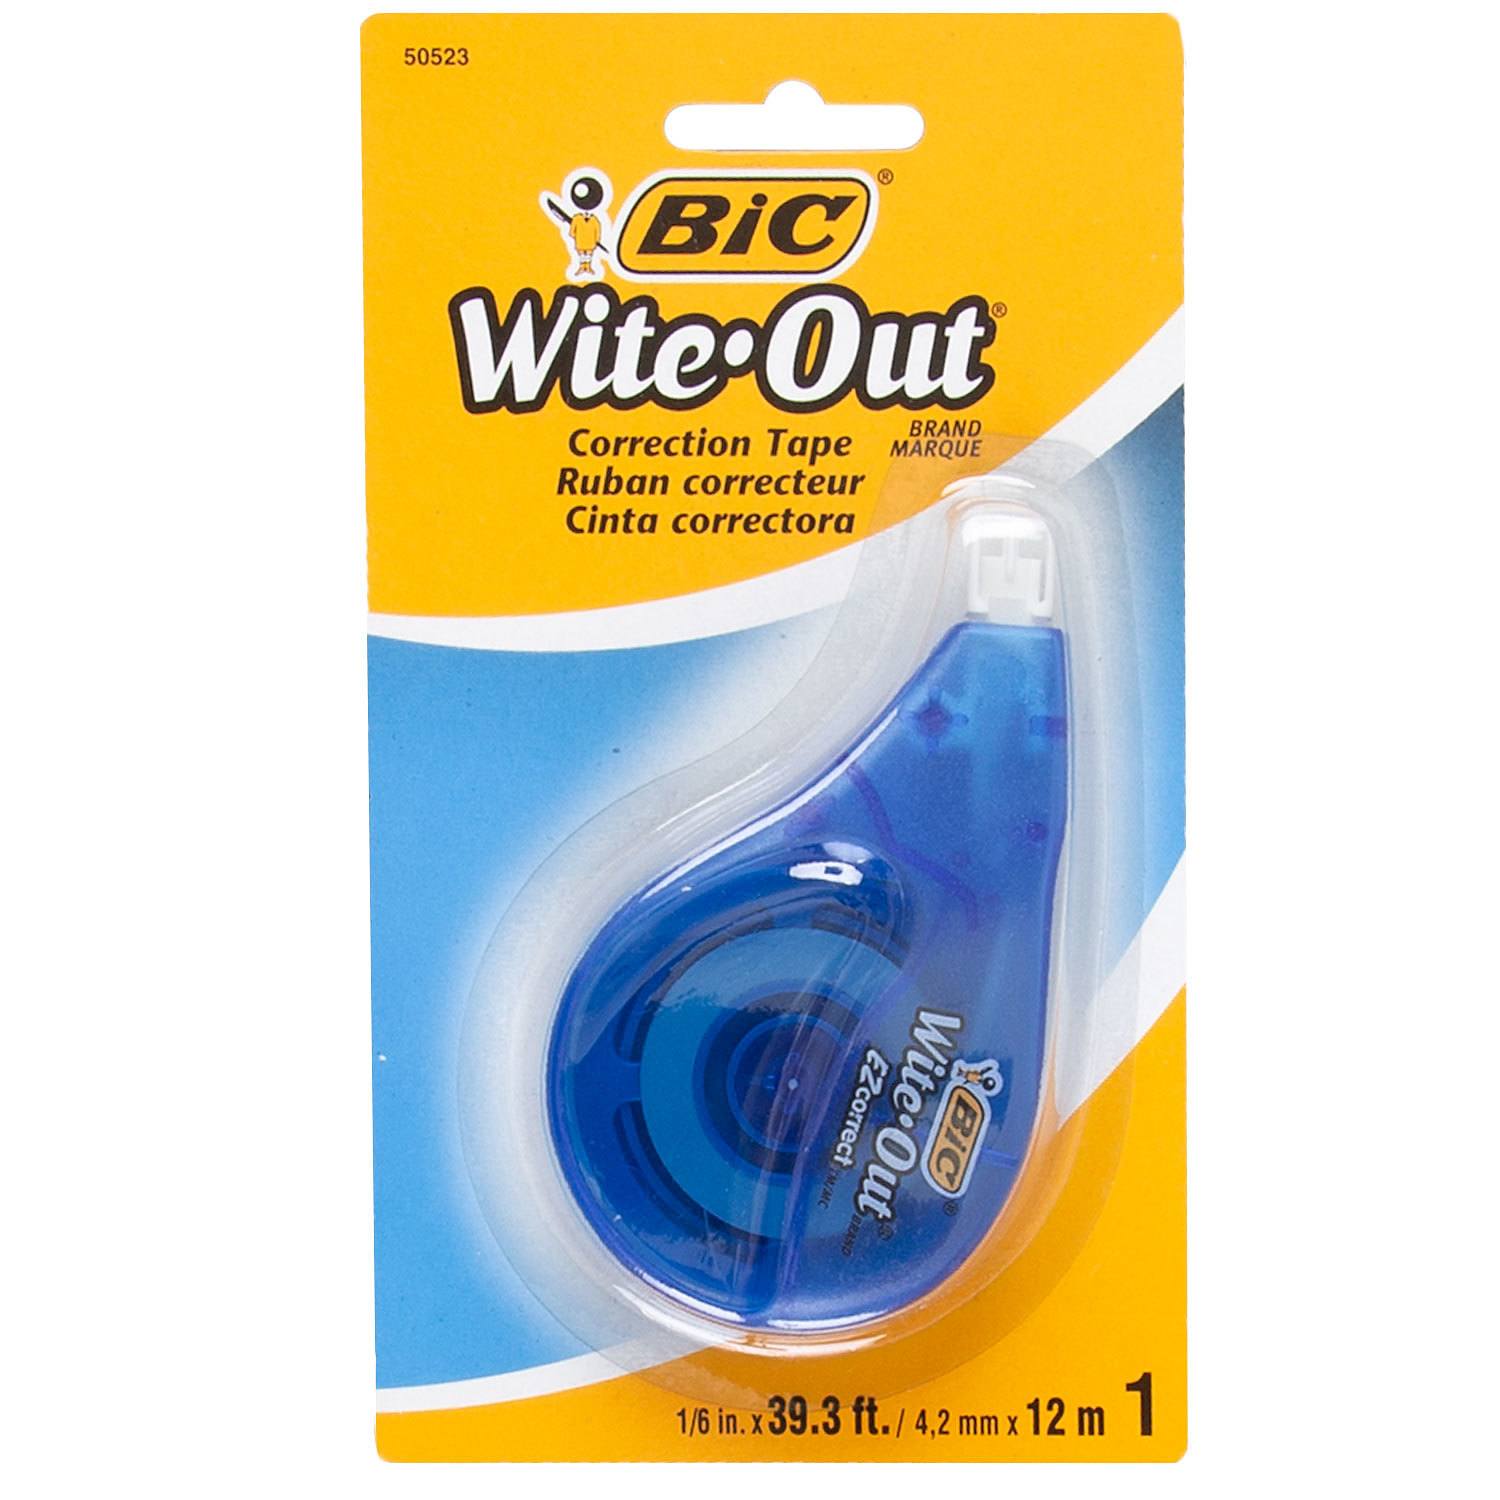 BIC Wite Out Brand EZ Correct Correction Tape Review - How Effective Is It?  [2023] 